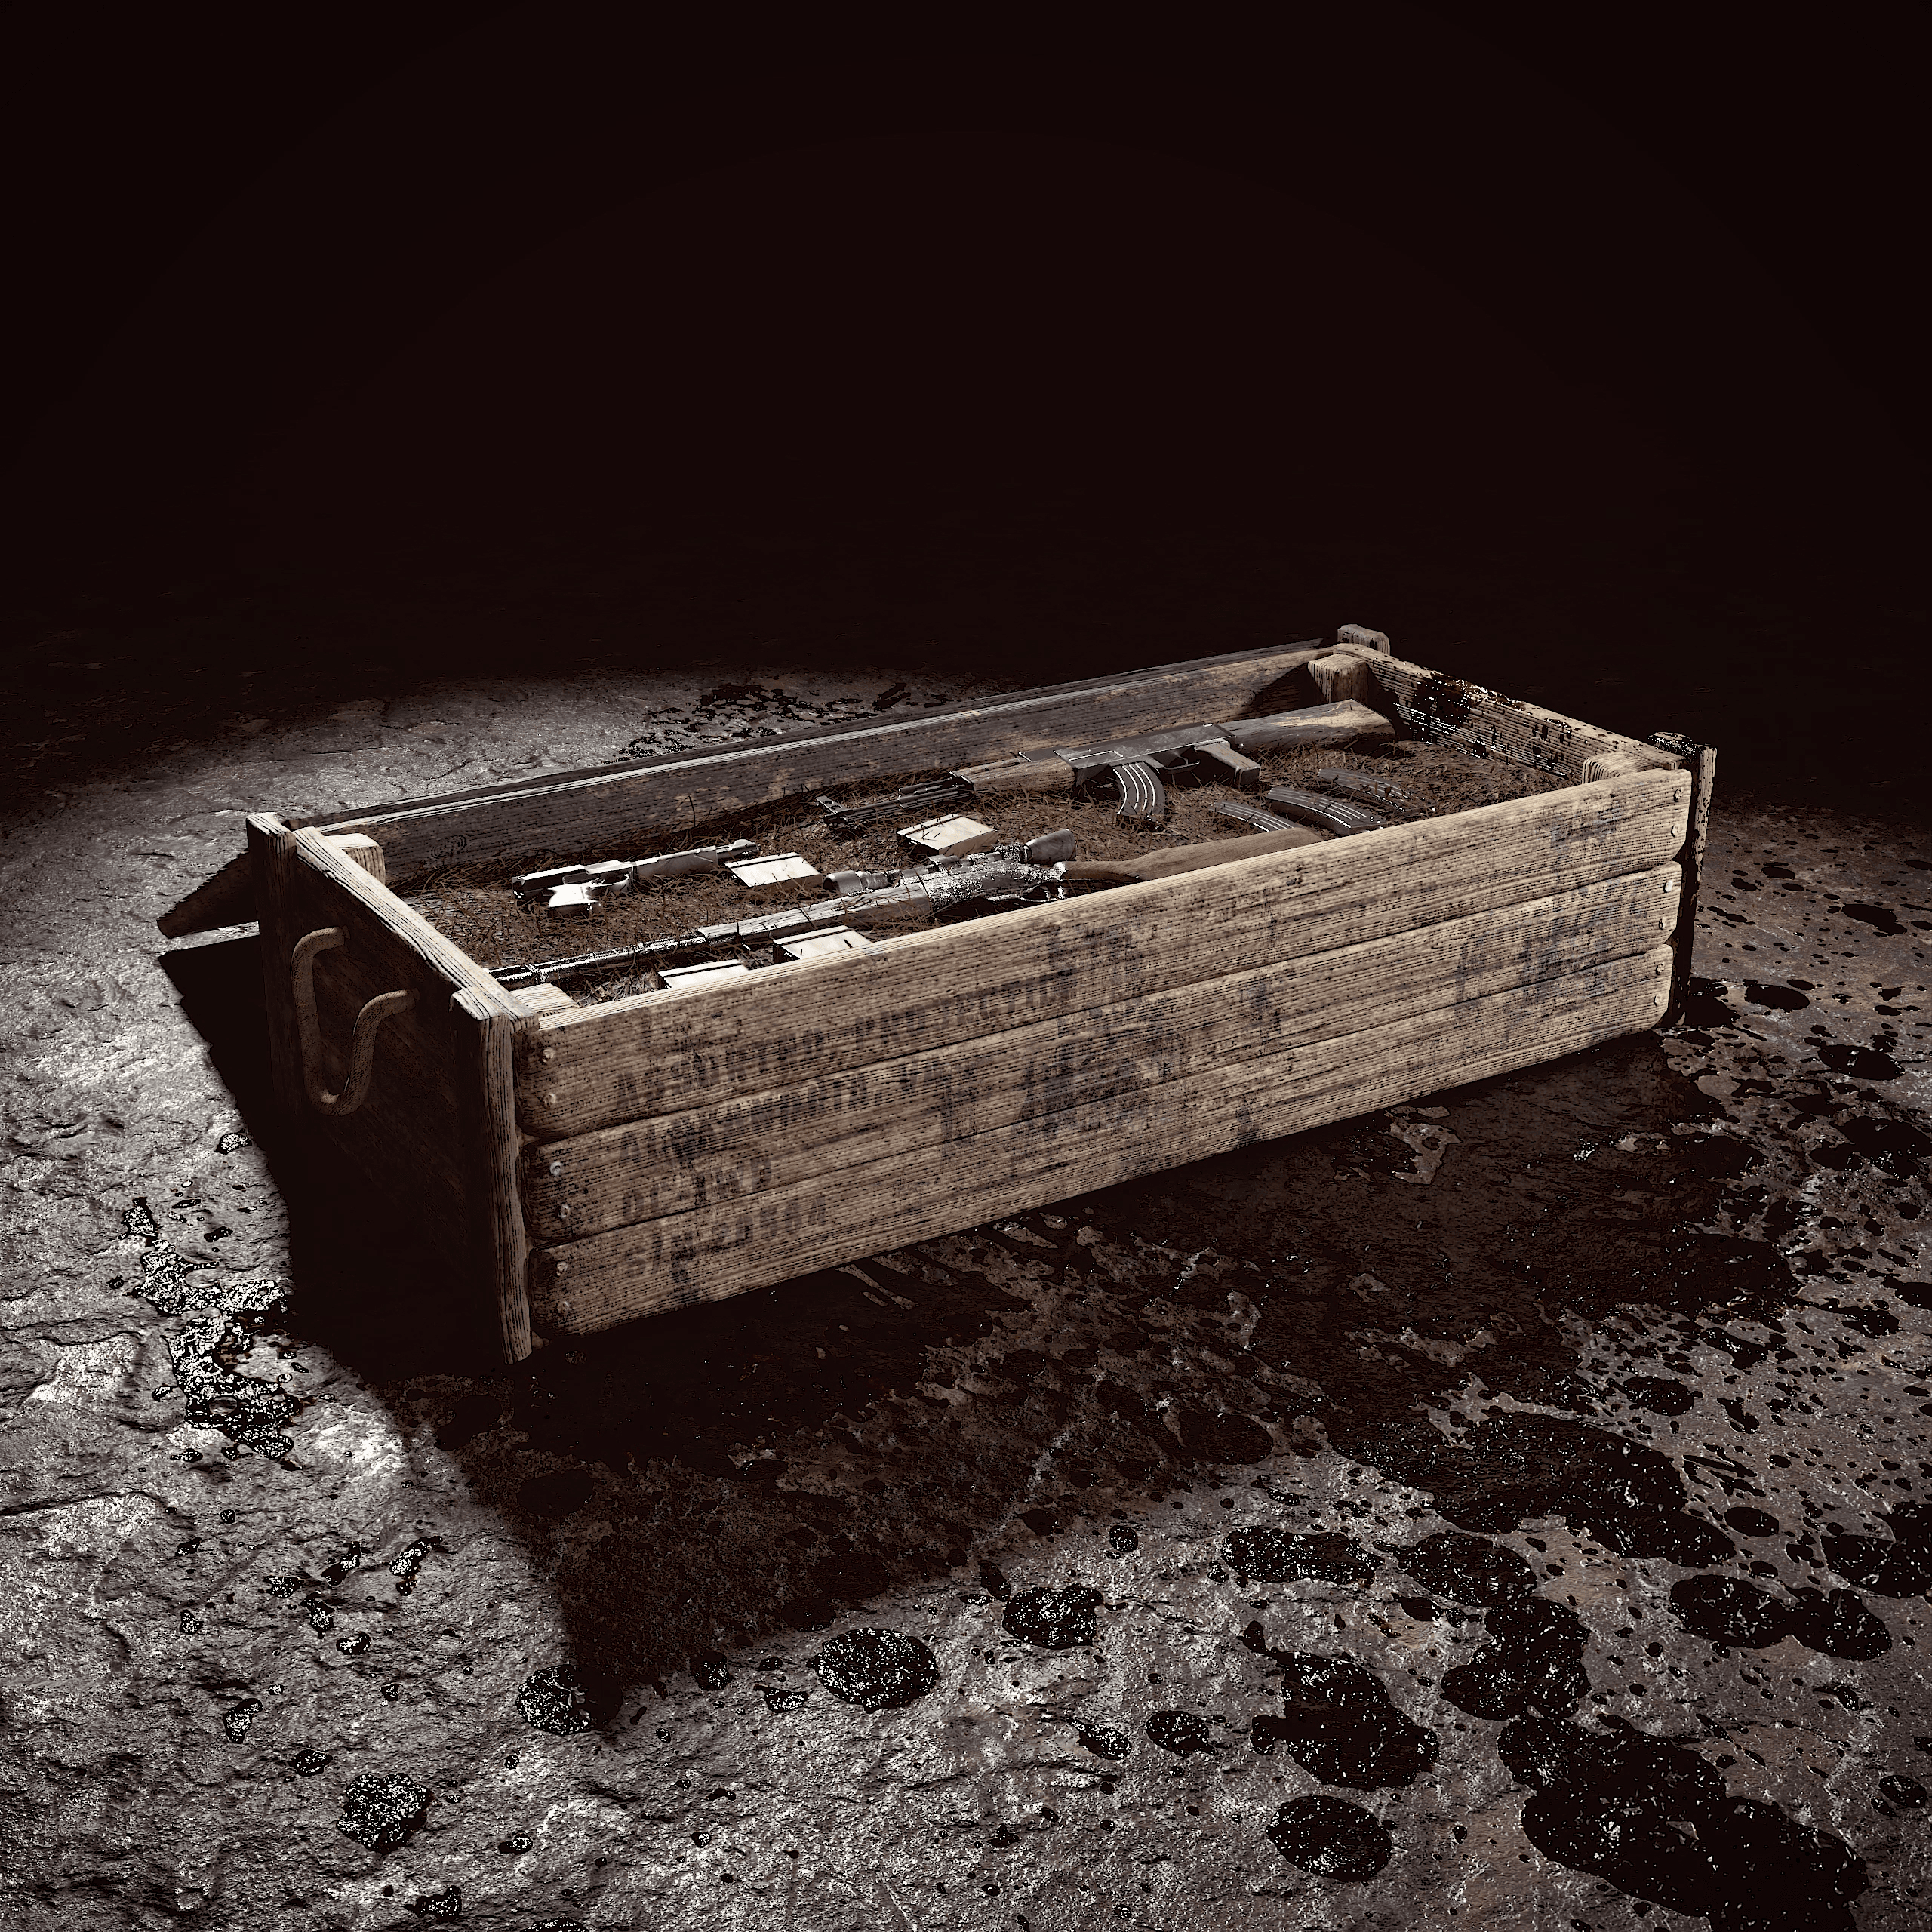 Wood Crate with Weapons